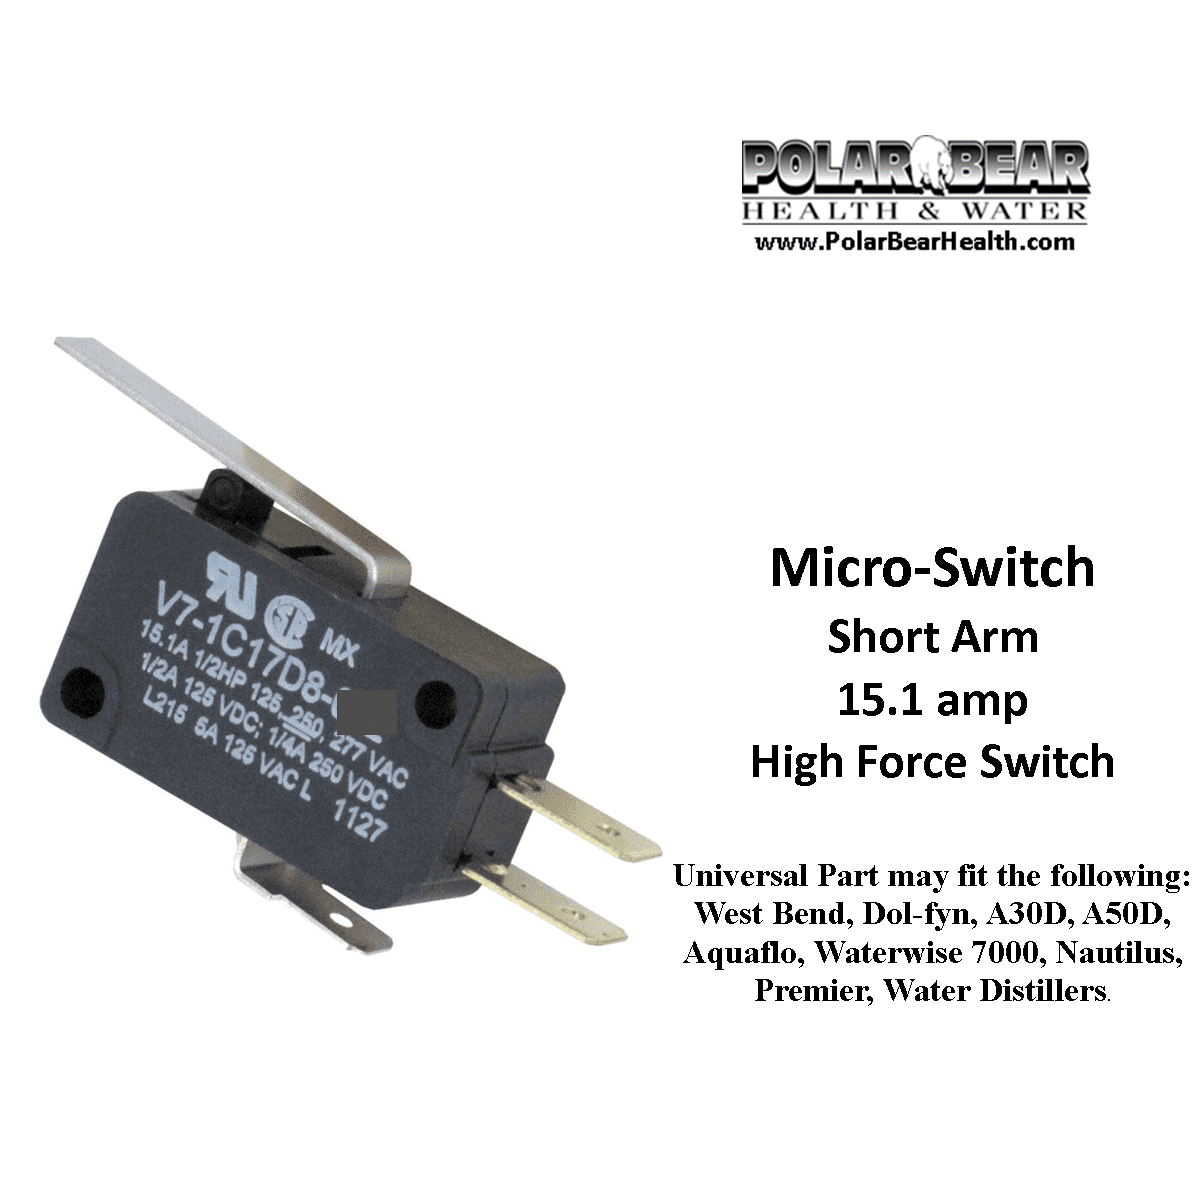 MicroSwitch Short arm Hi Force